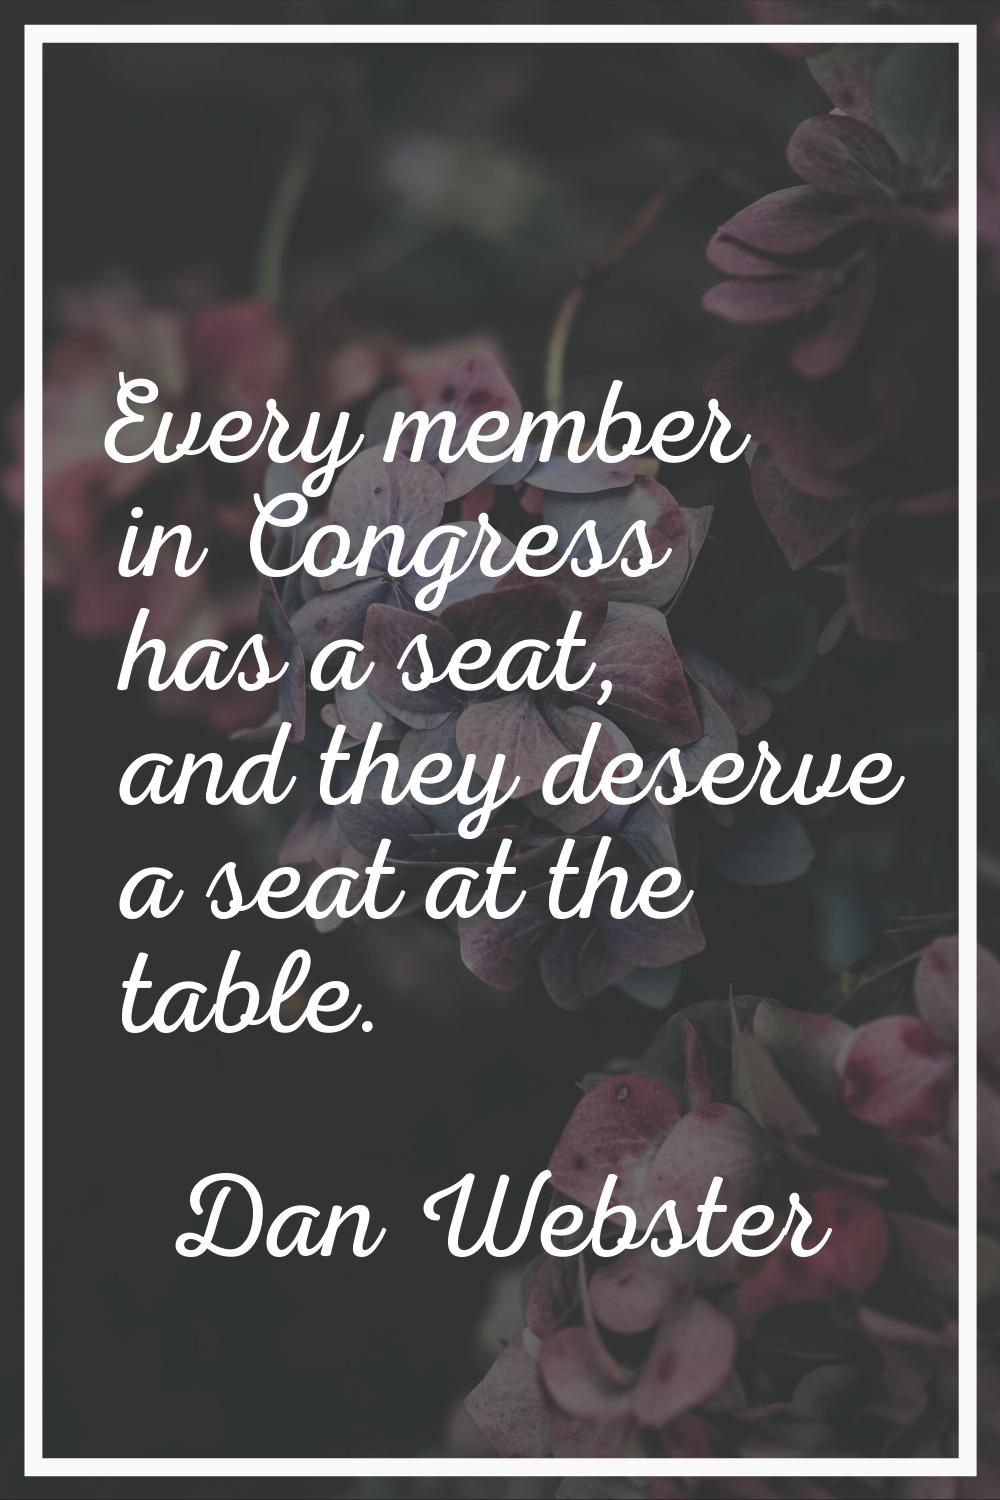 Every member in Congress has a seat, and they deserve a seat at the table.